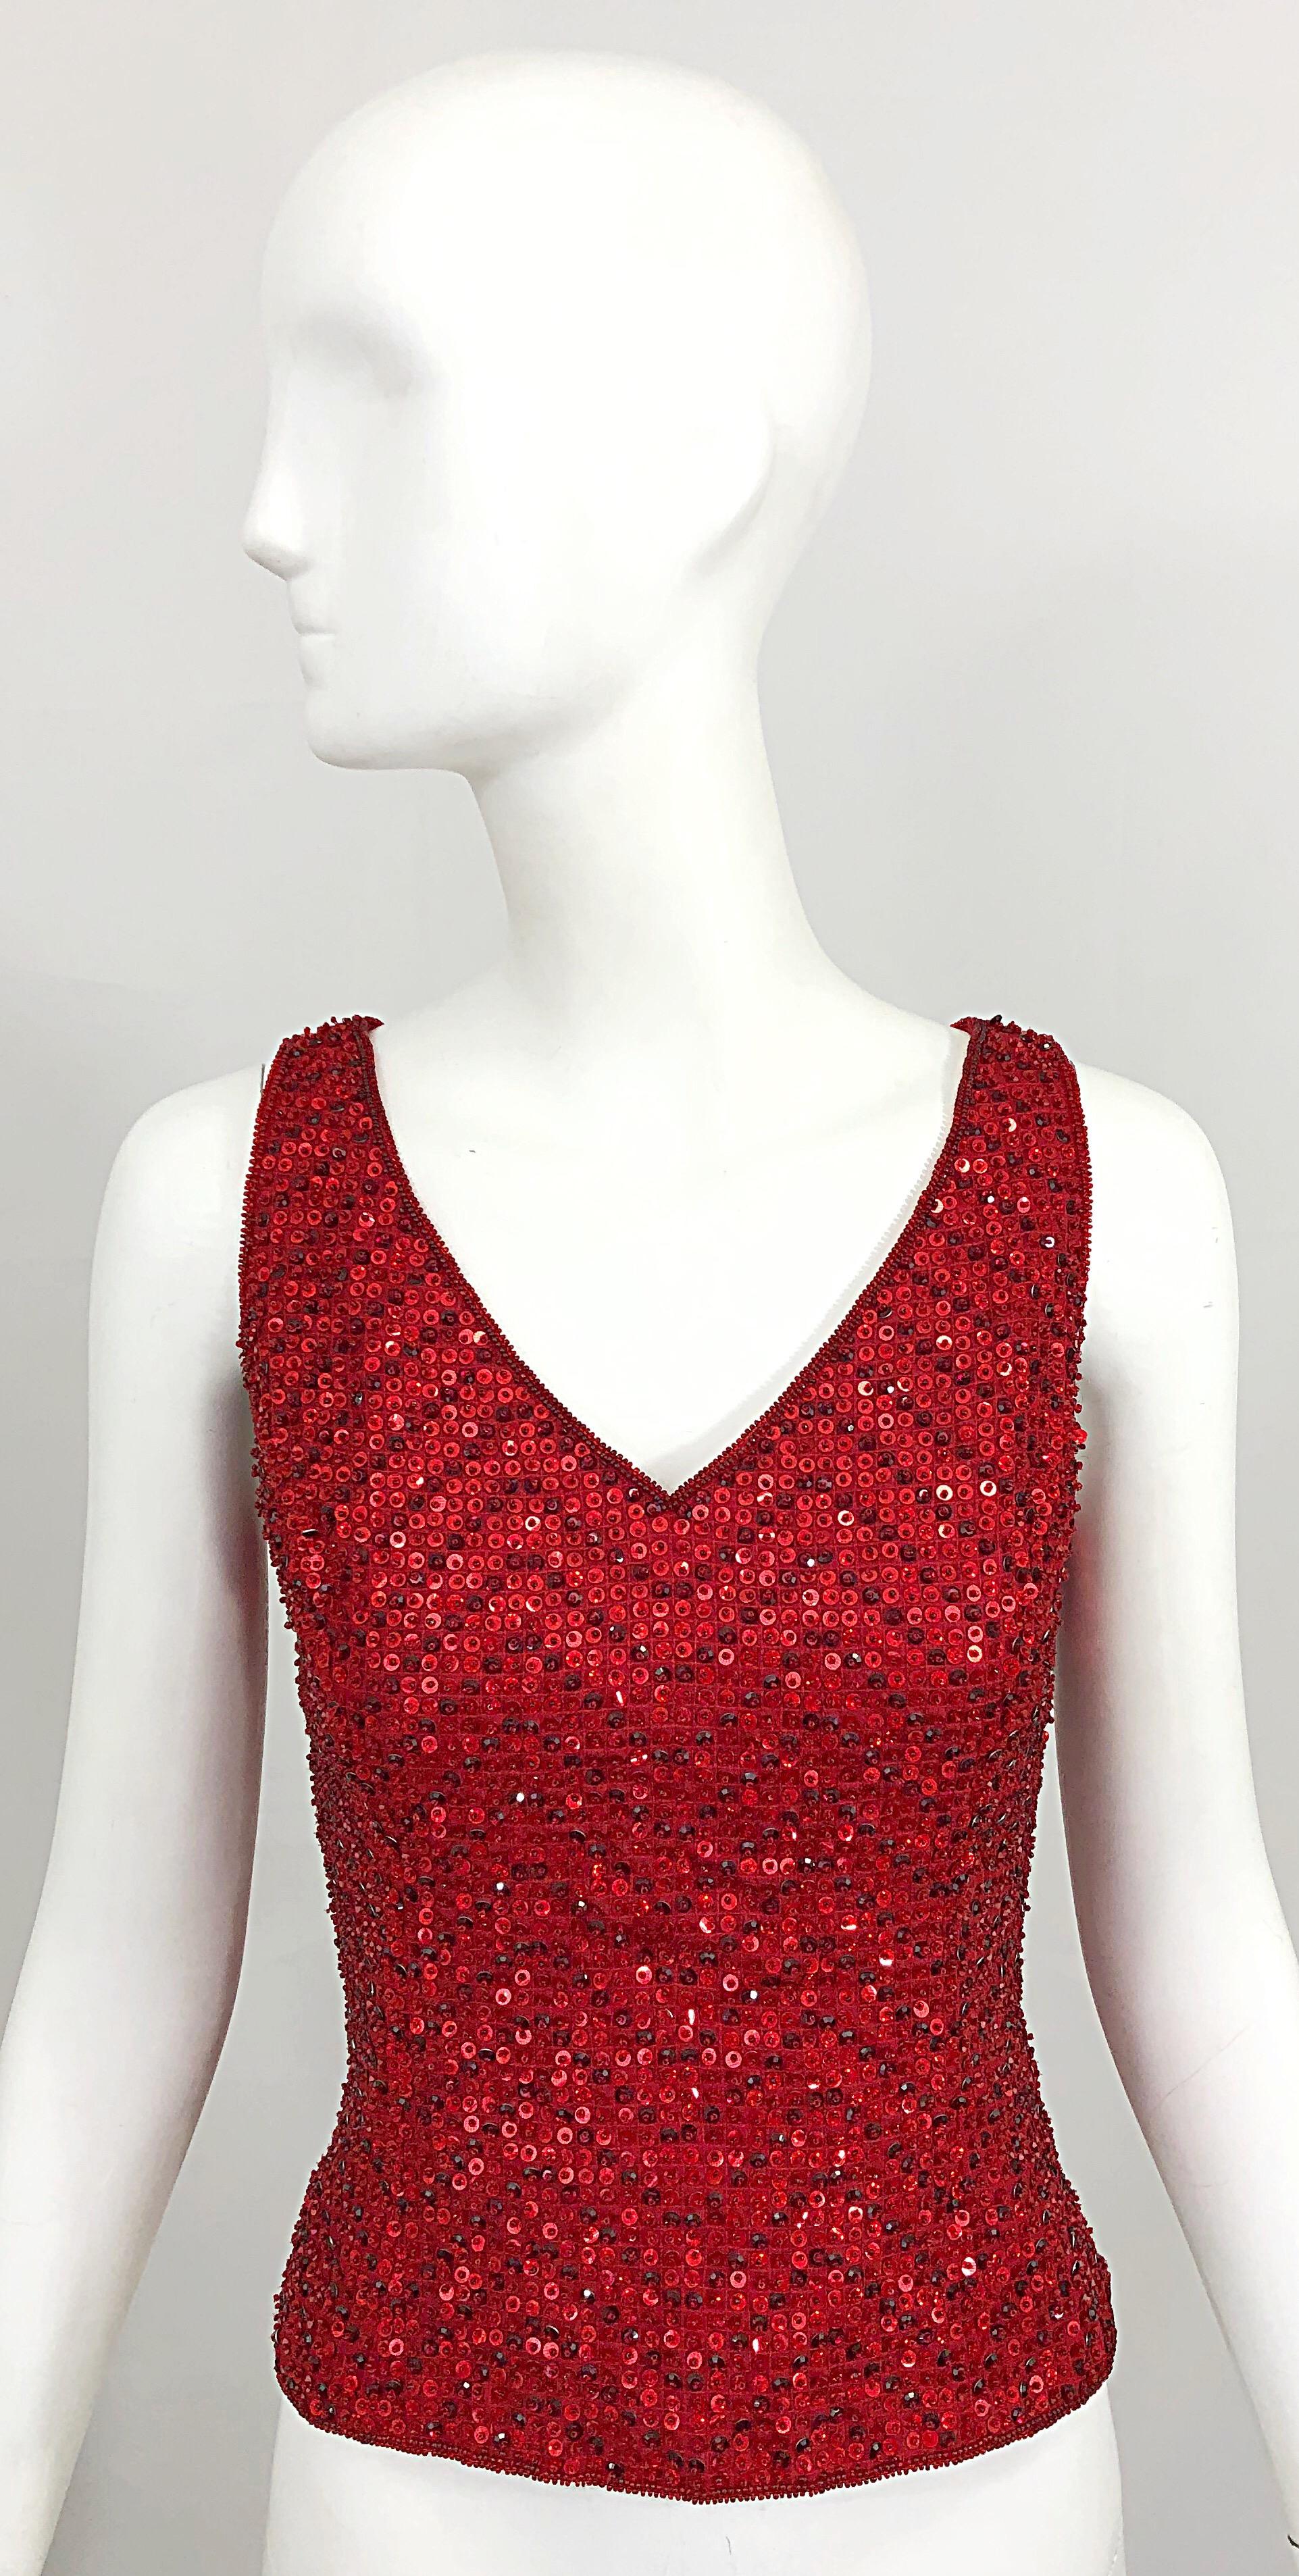 Chic vintage ESCADA COUTURE lipstick red silk sequined and beaded sleeveless blouse! Features thousands of hand-sewn sequins and beads throughout the entire top. Hidden zipper up the side with hook-and-eye closure. Can easily be dressed up or down,